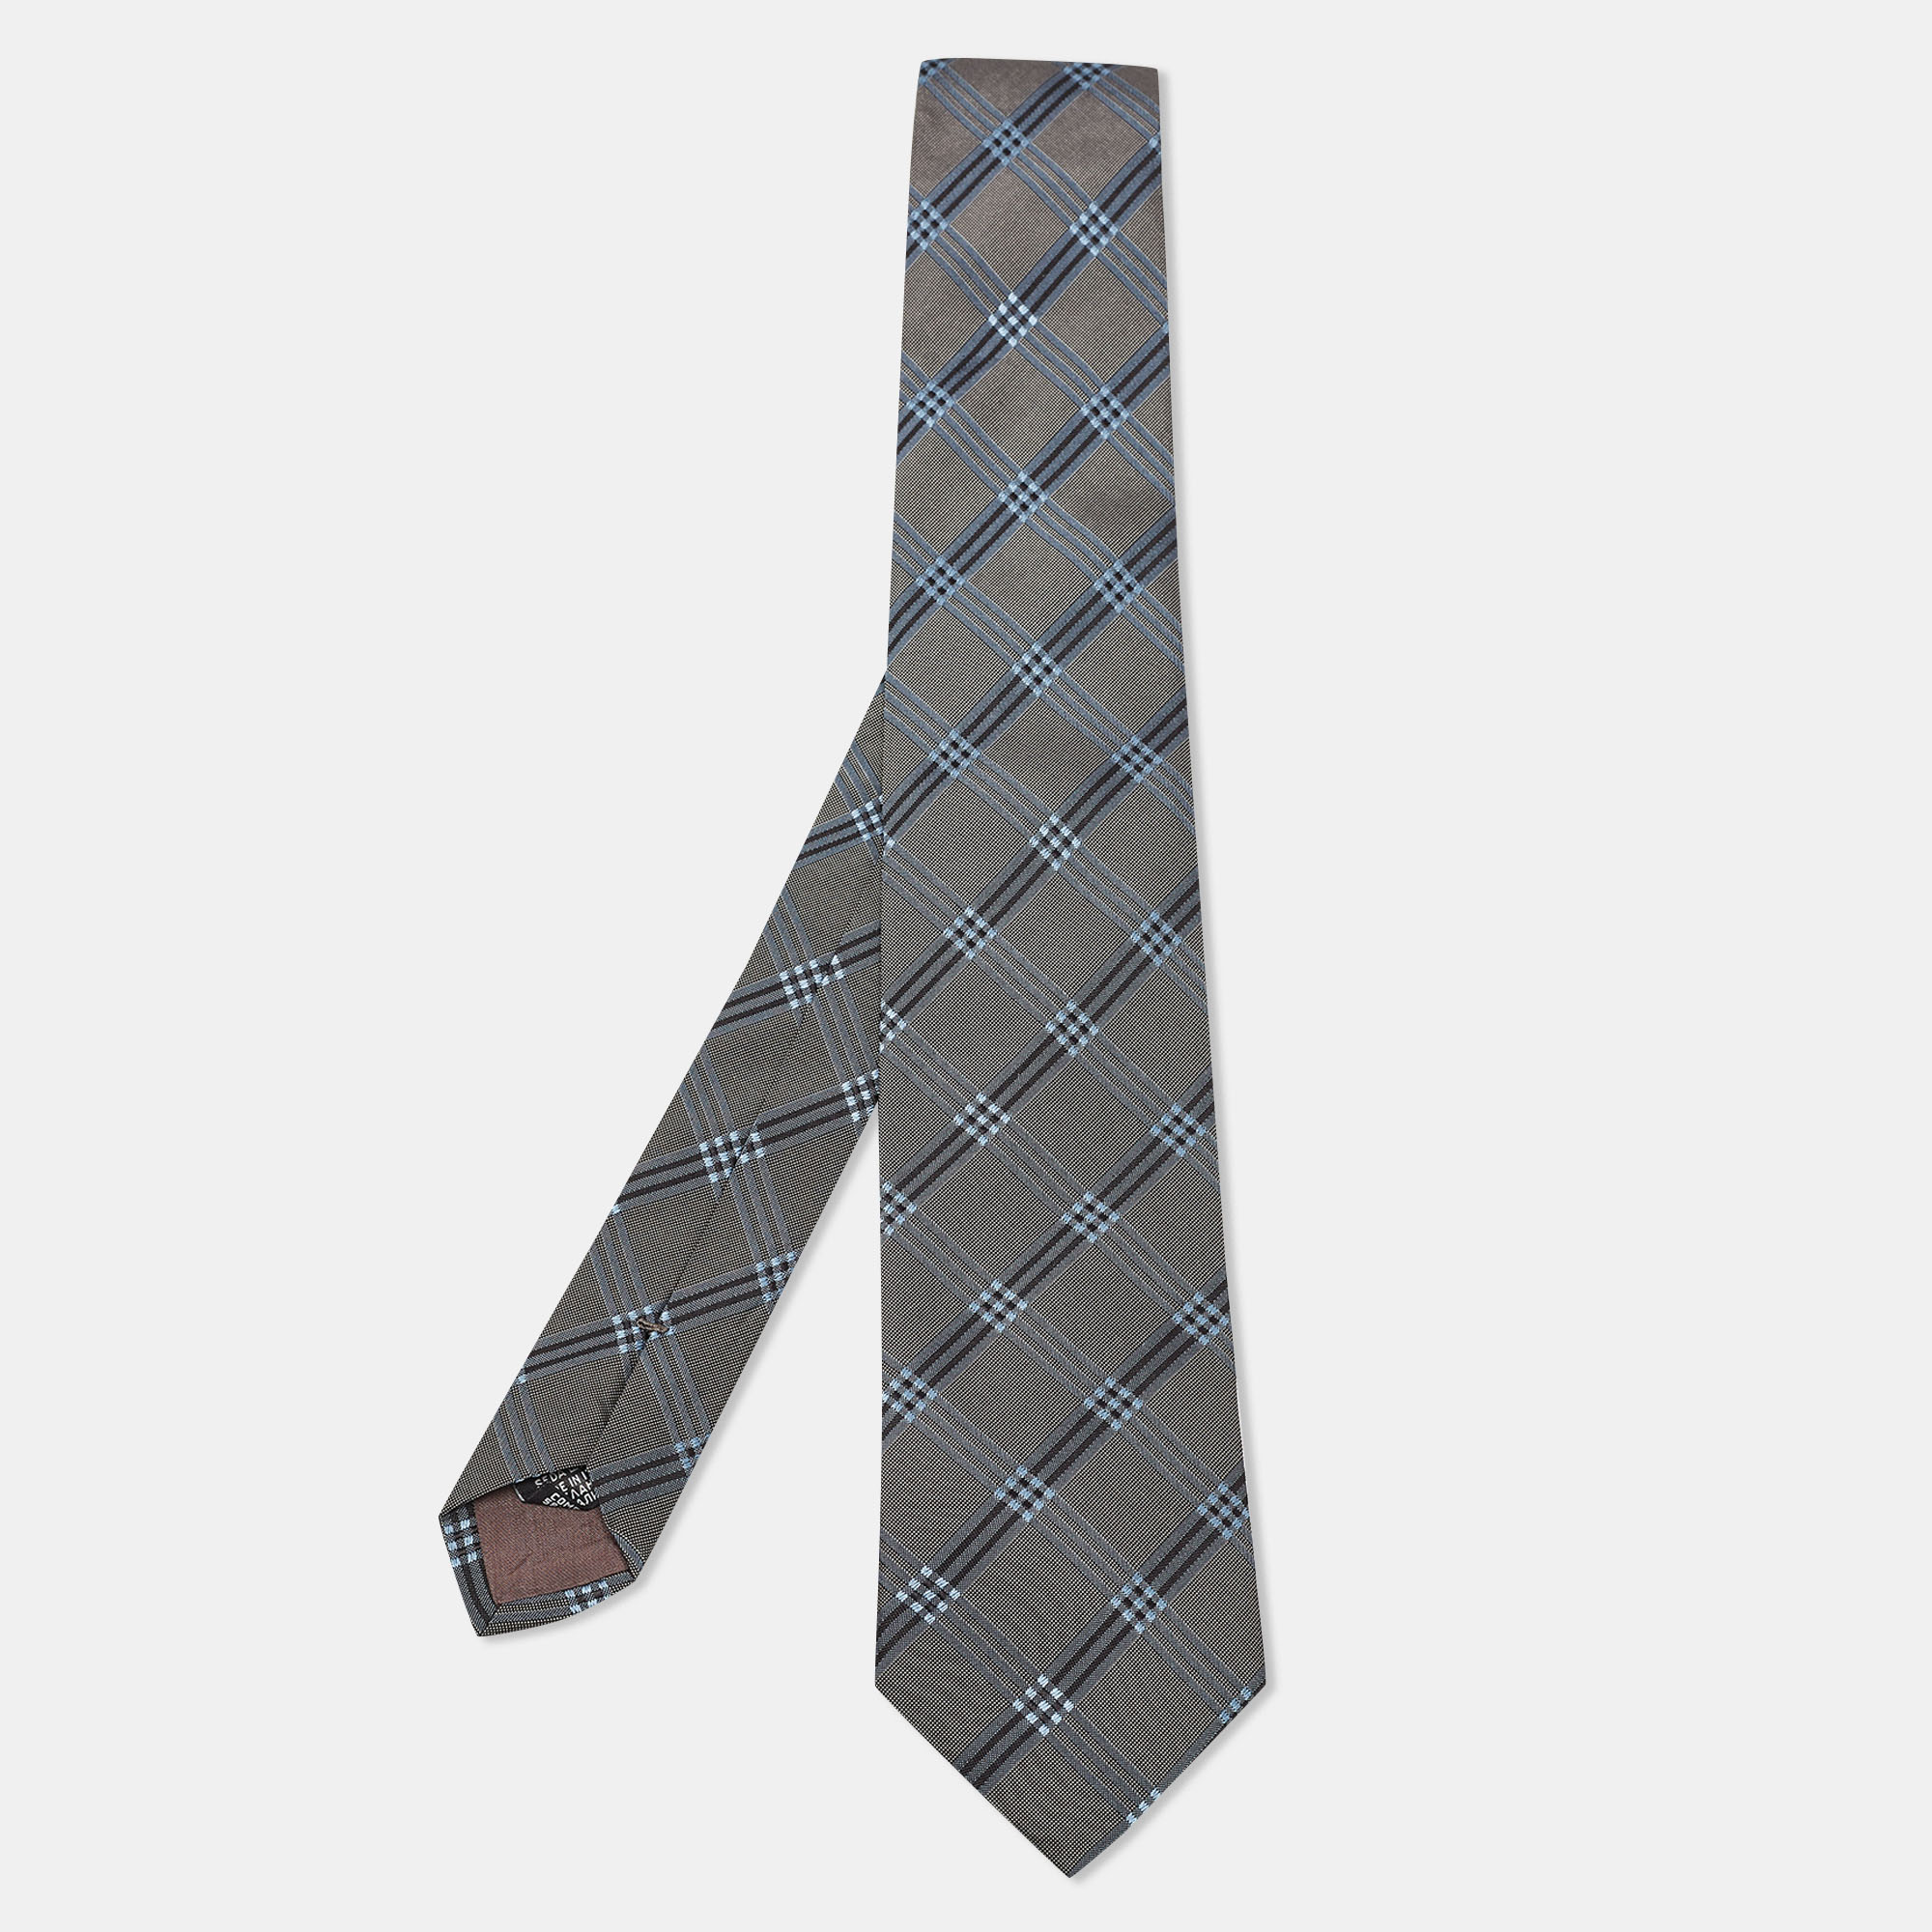 Made of silk this Boss By Hugo Boss grey/blue tie for men has check prints all over. This finely tailored accessory will add a charming finish.